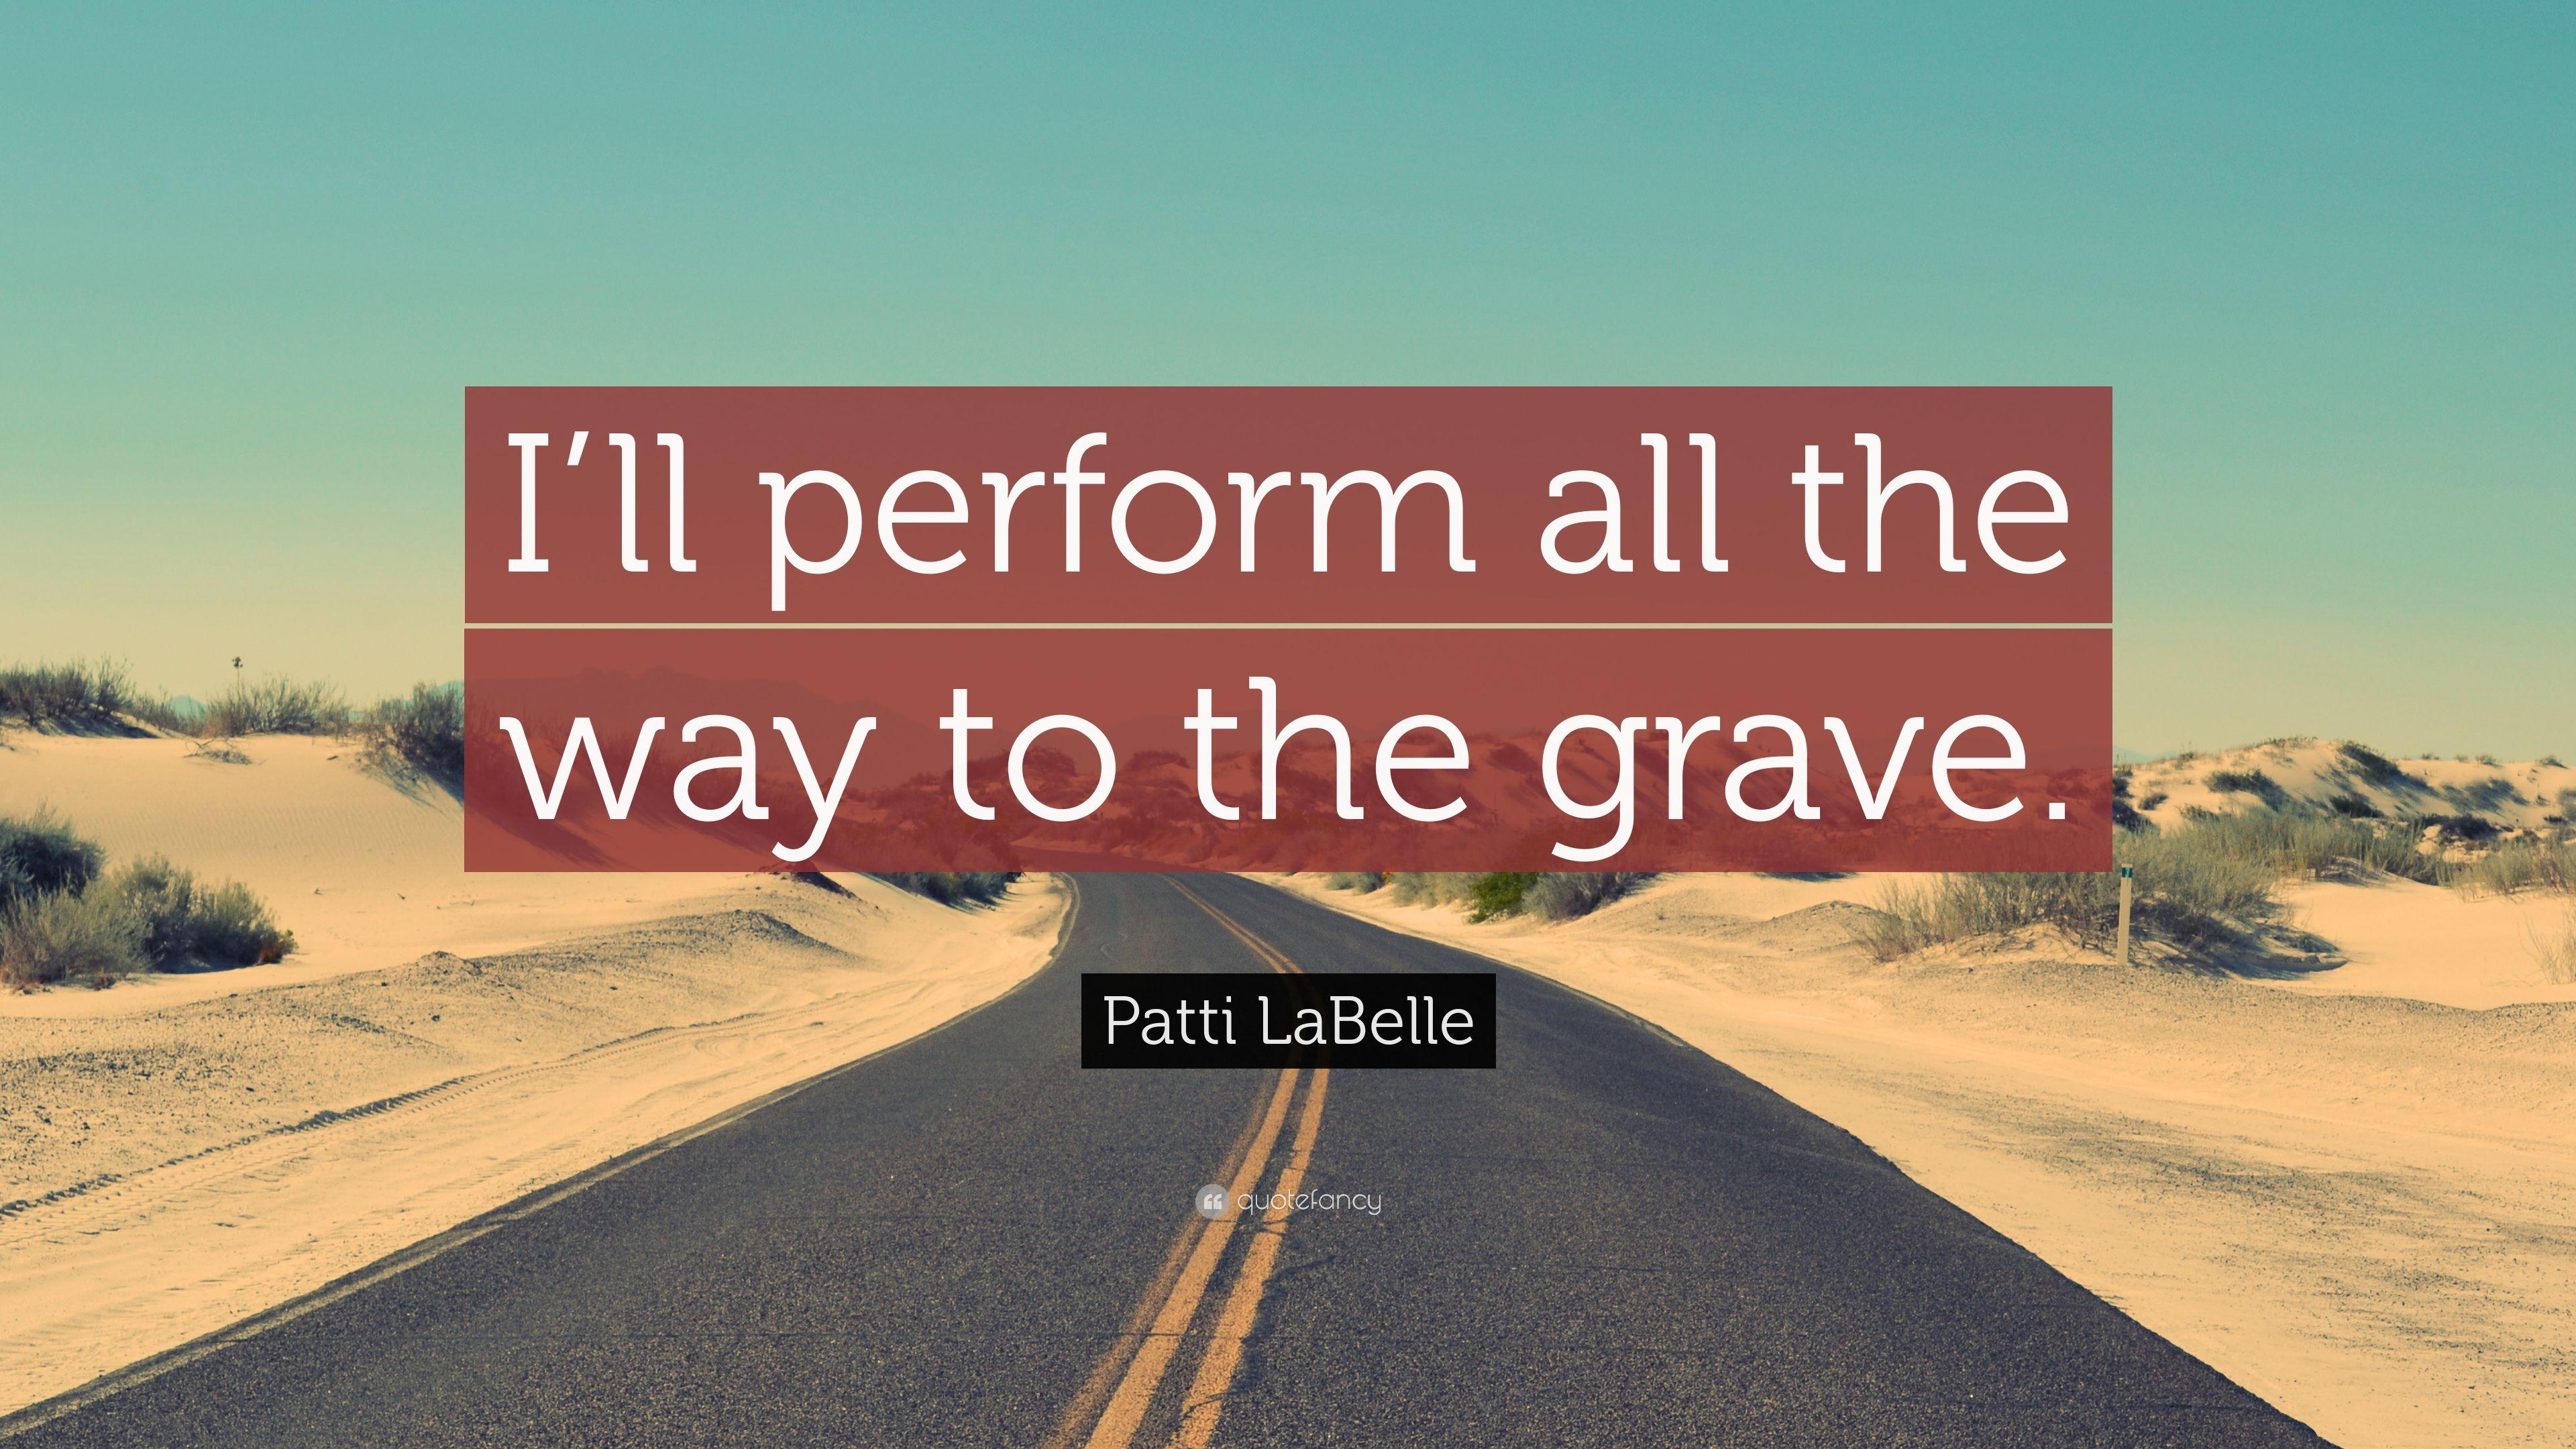 Patti LaBelle Quote: “I'll perform all the way to the grave.” 7